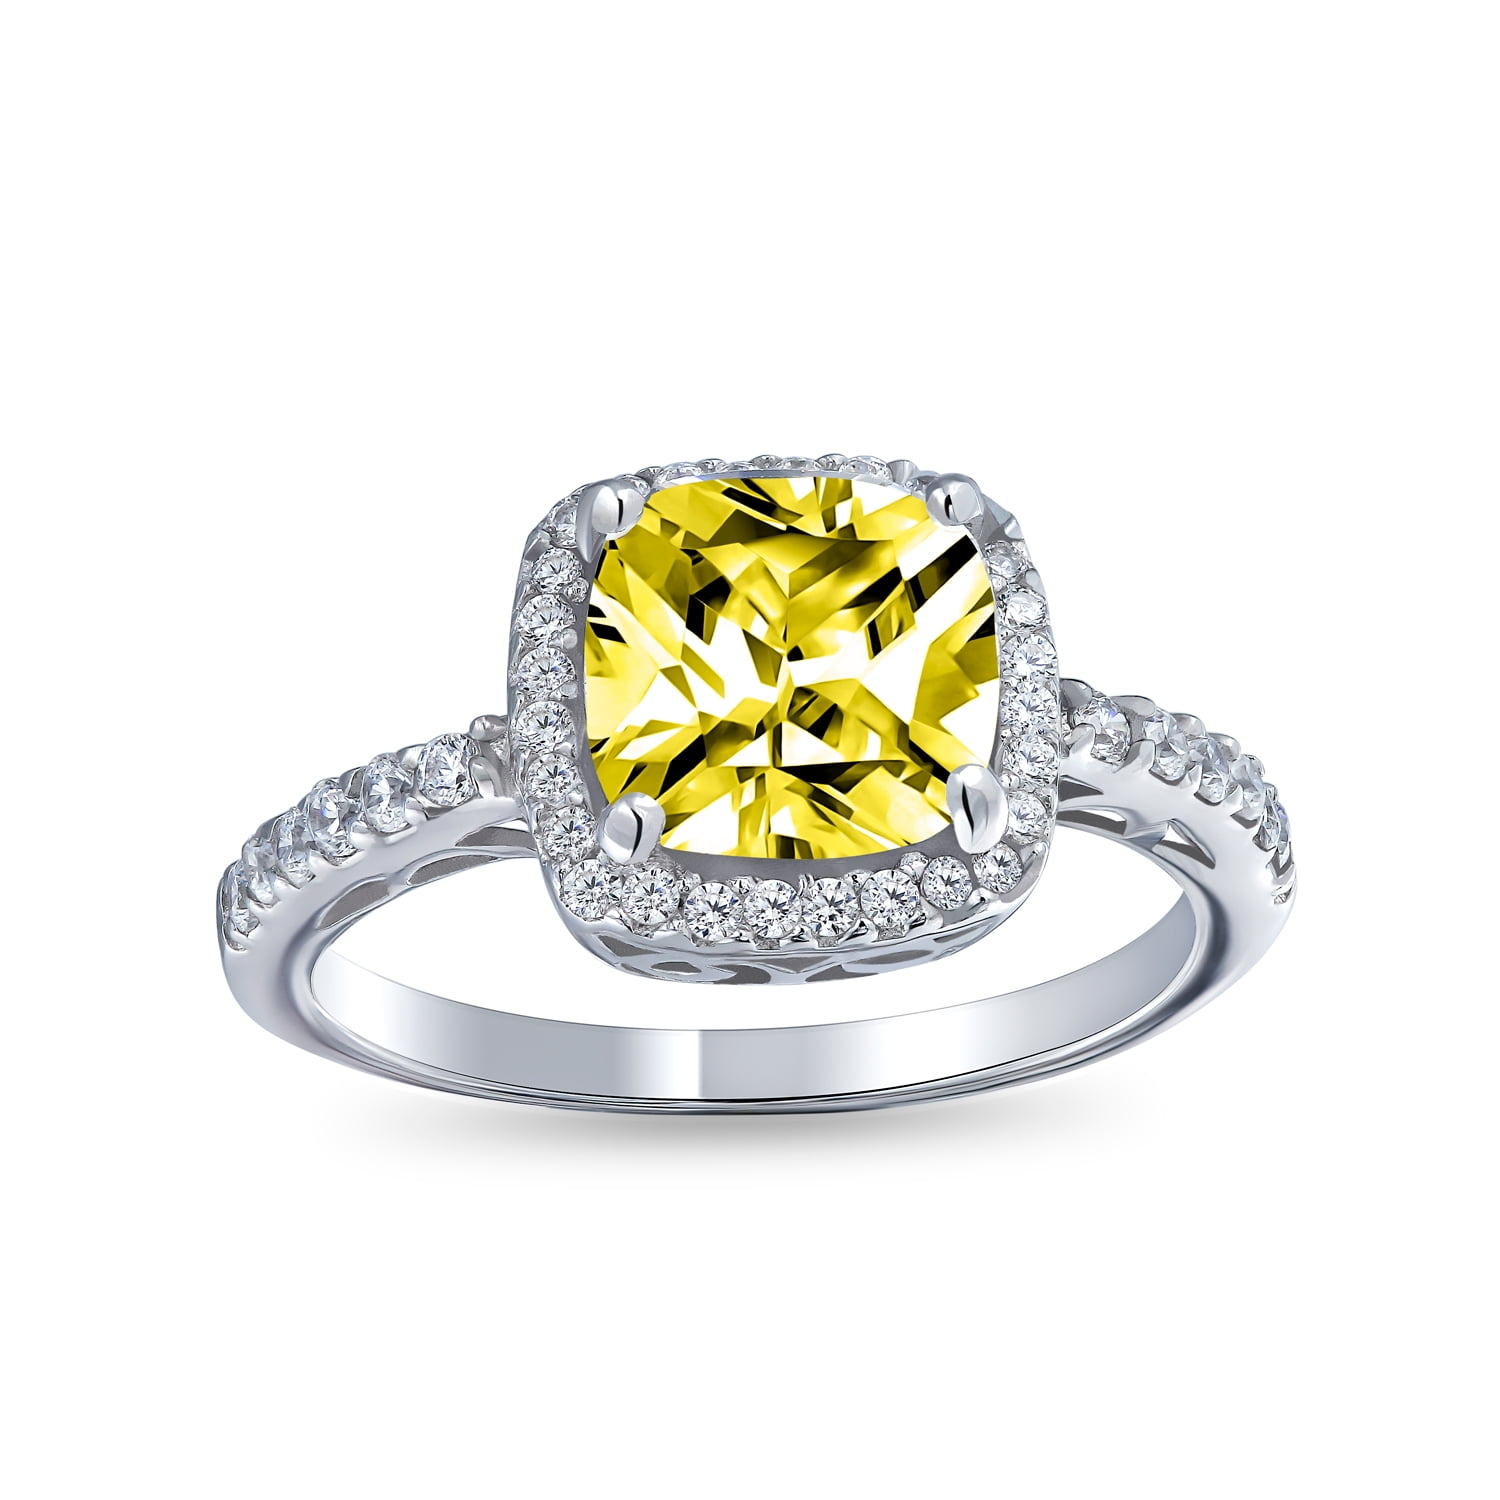 Bridal Wedding Unique 3CT CZ Canary Yellow Square AAA Cubic Zirconia Solitaire Brilliant Princess Cut Trillion Side Stones Engagement Ring .925 Sterling Silver For Women 